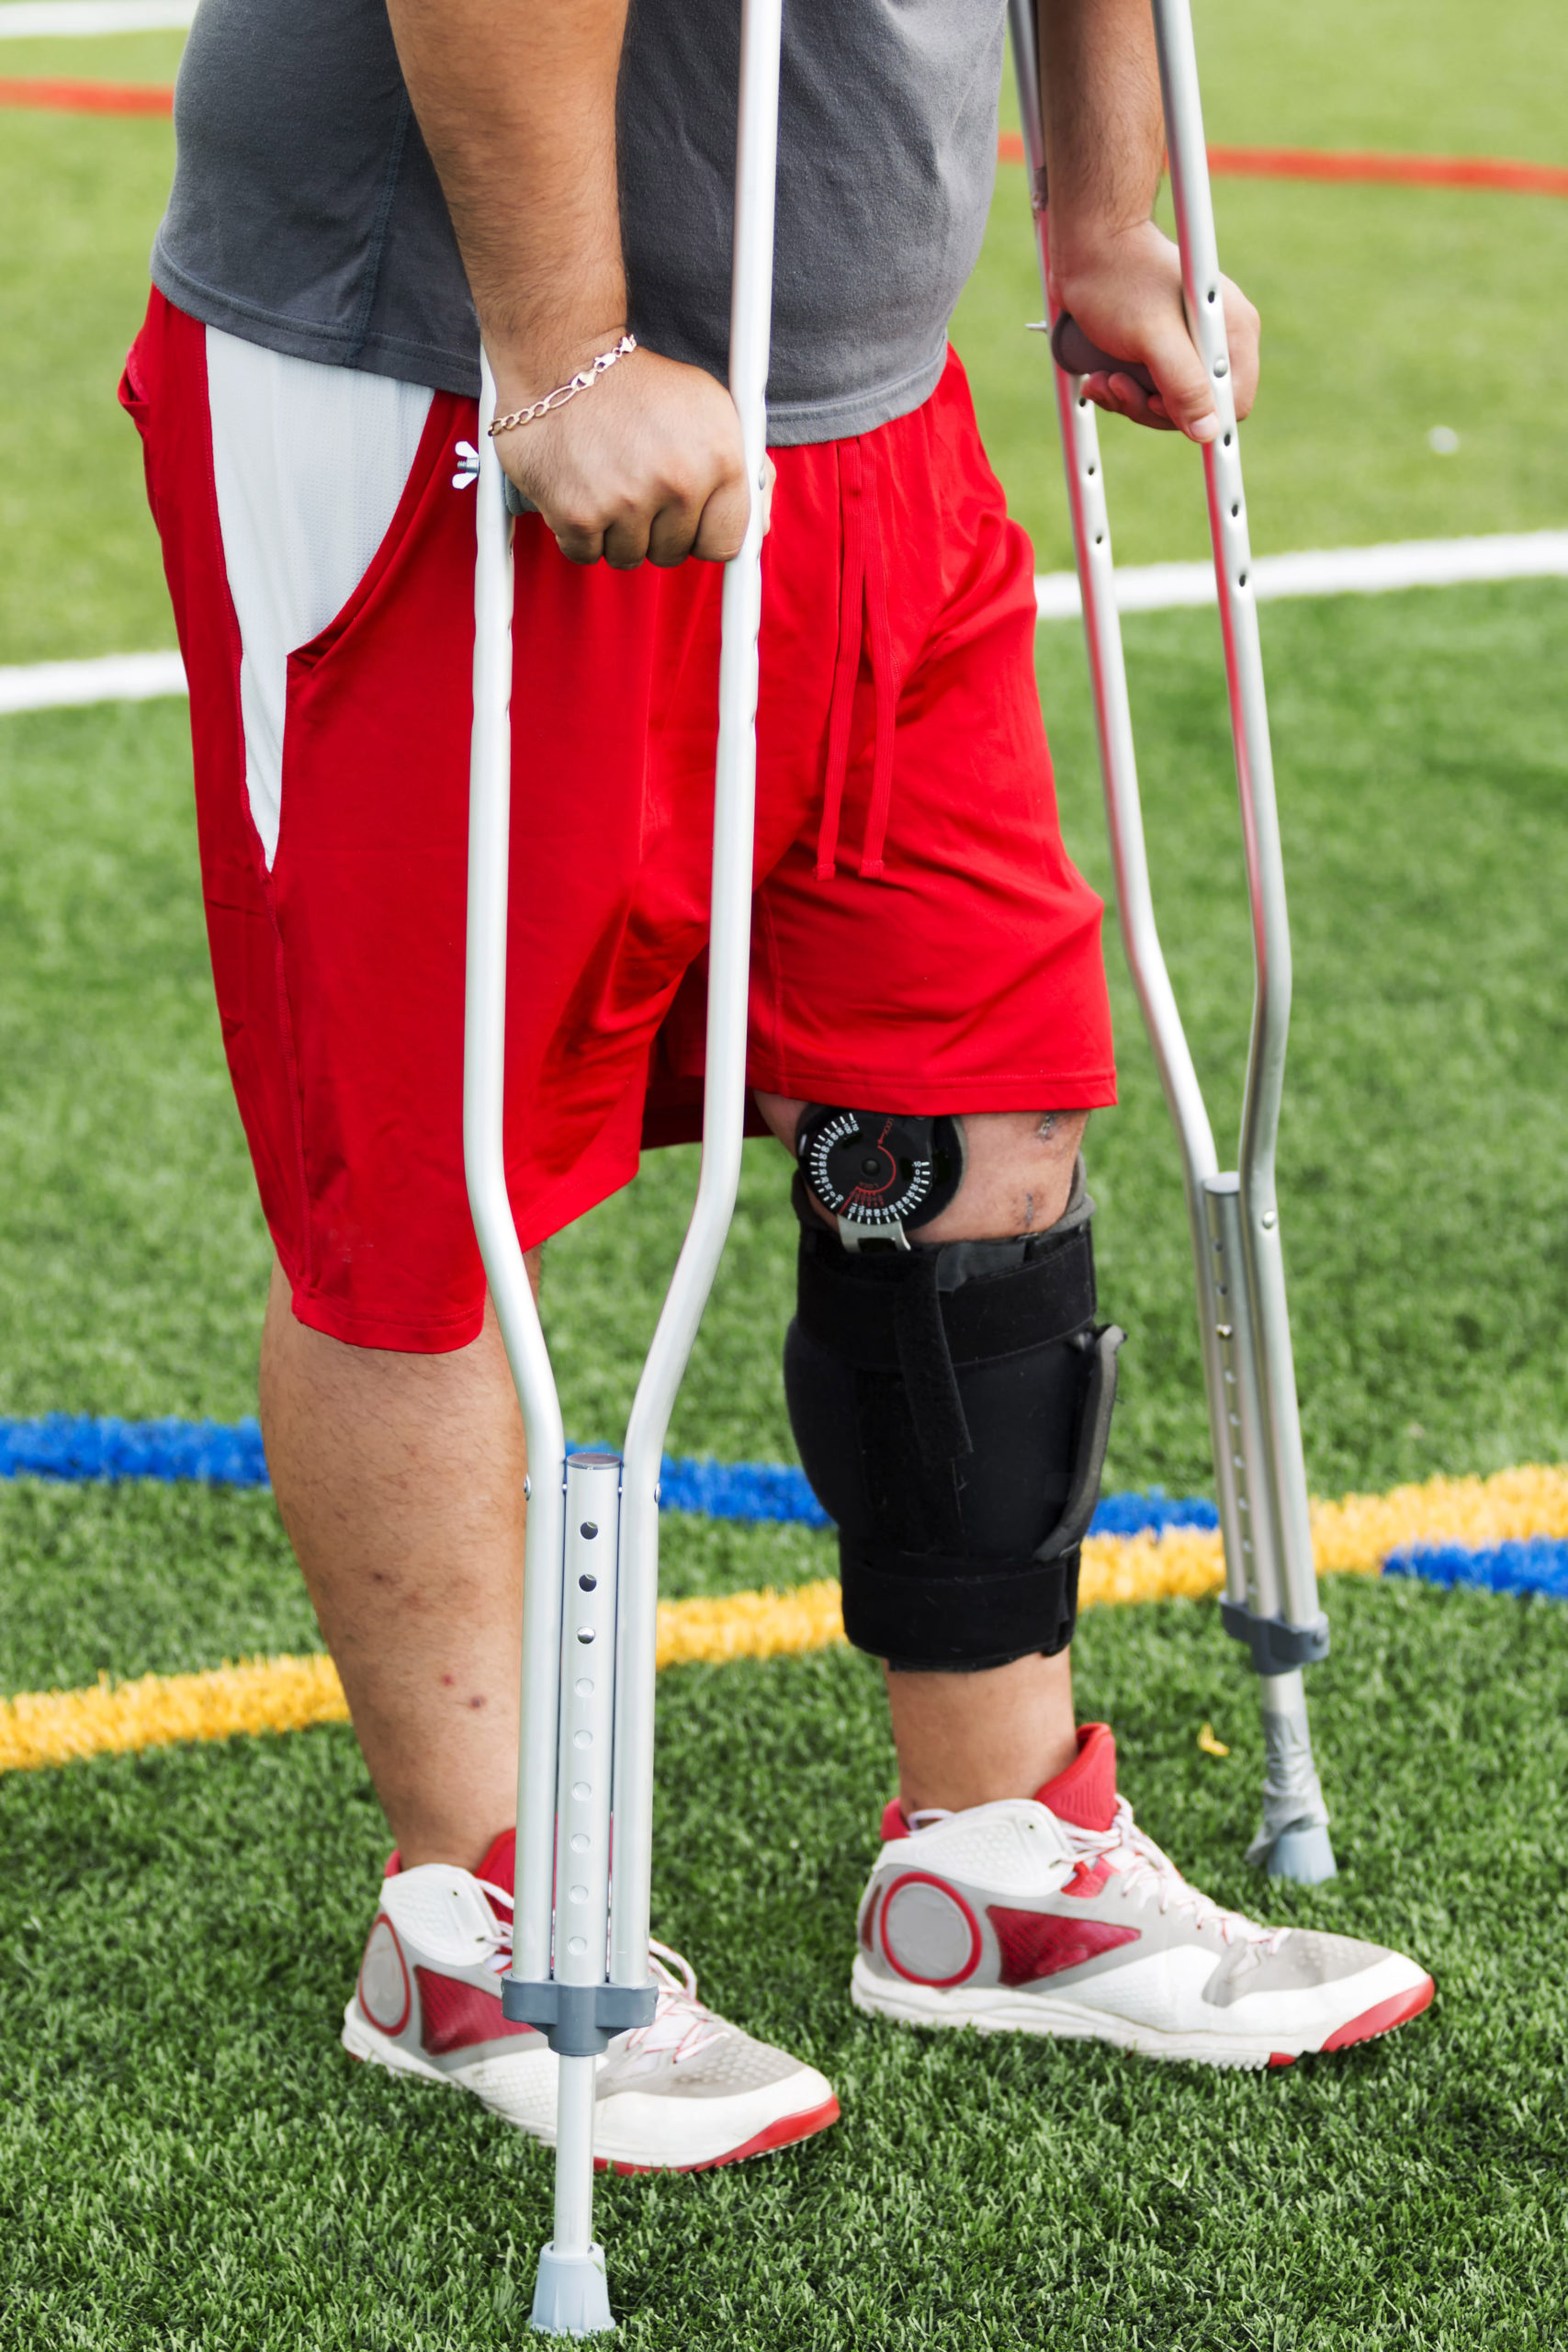 Injured male athlete on the sidelines wearing a knee brace and crutches.